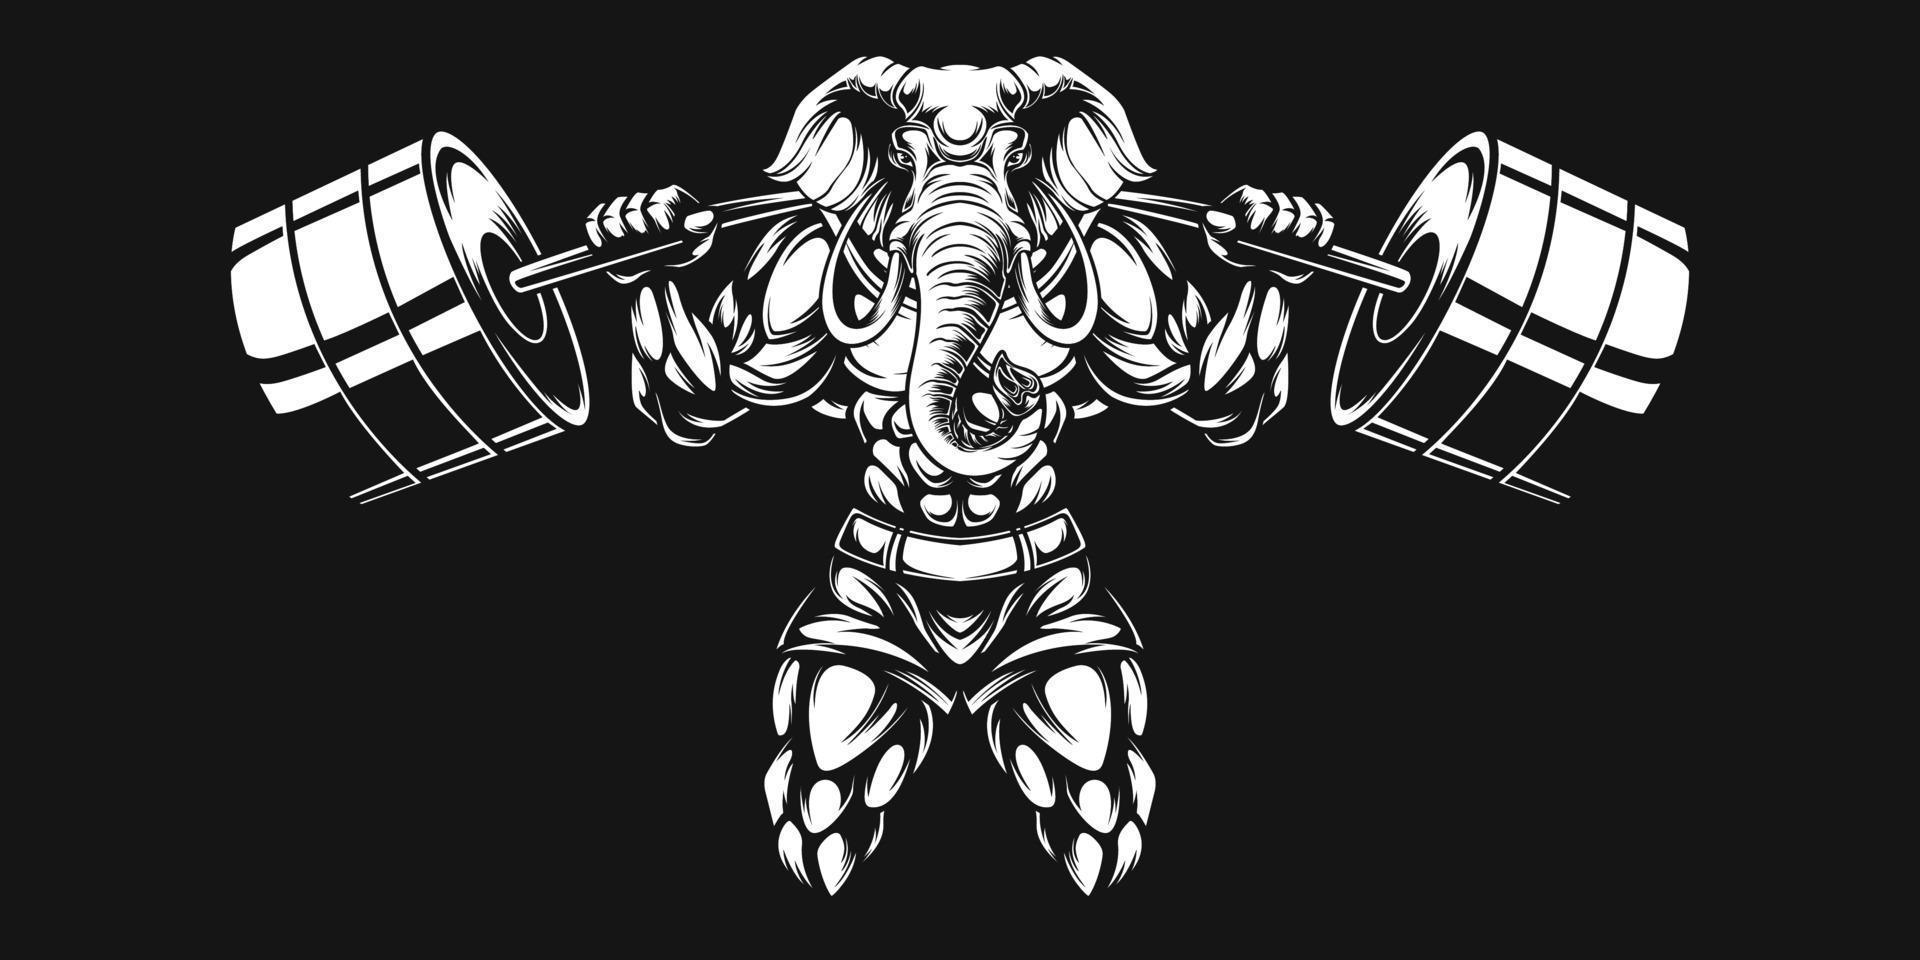 elephant bodybuilder artwork with lifting barbell weights vector